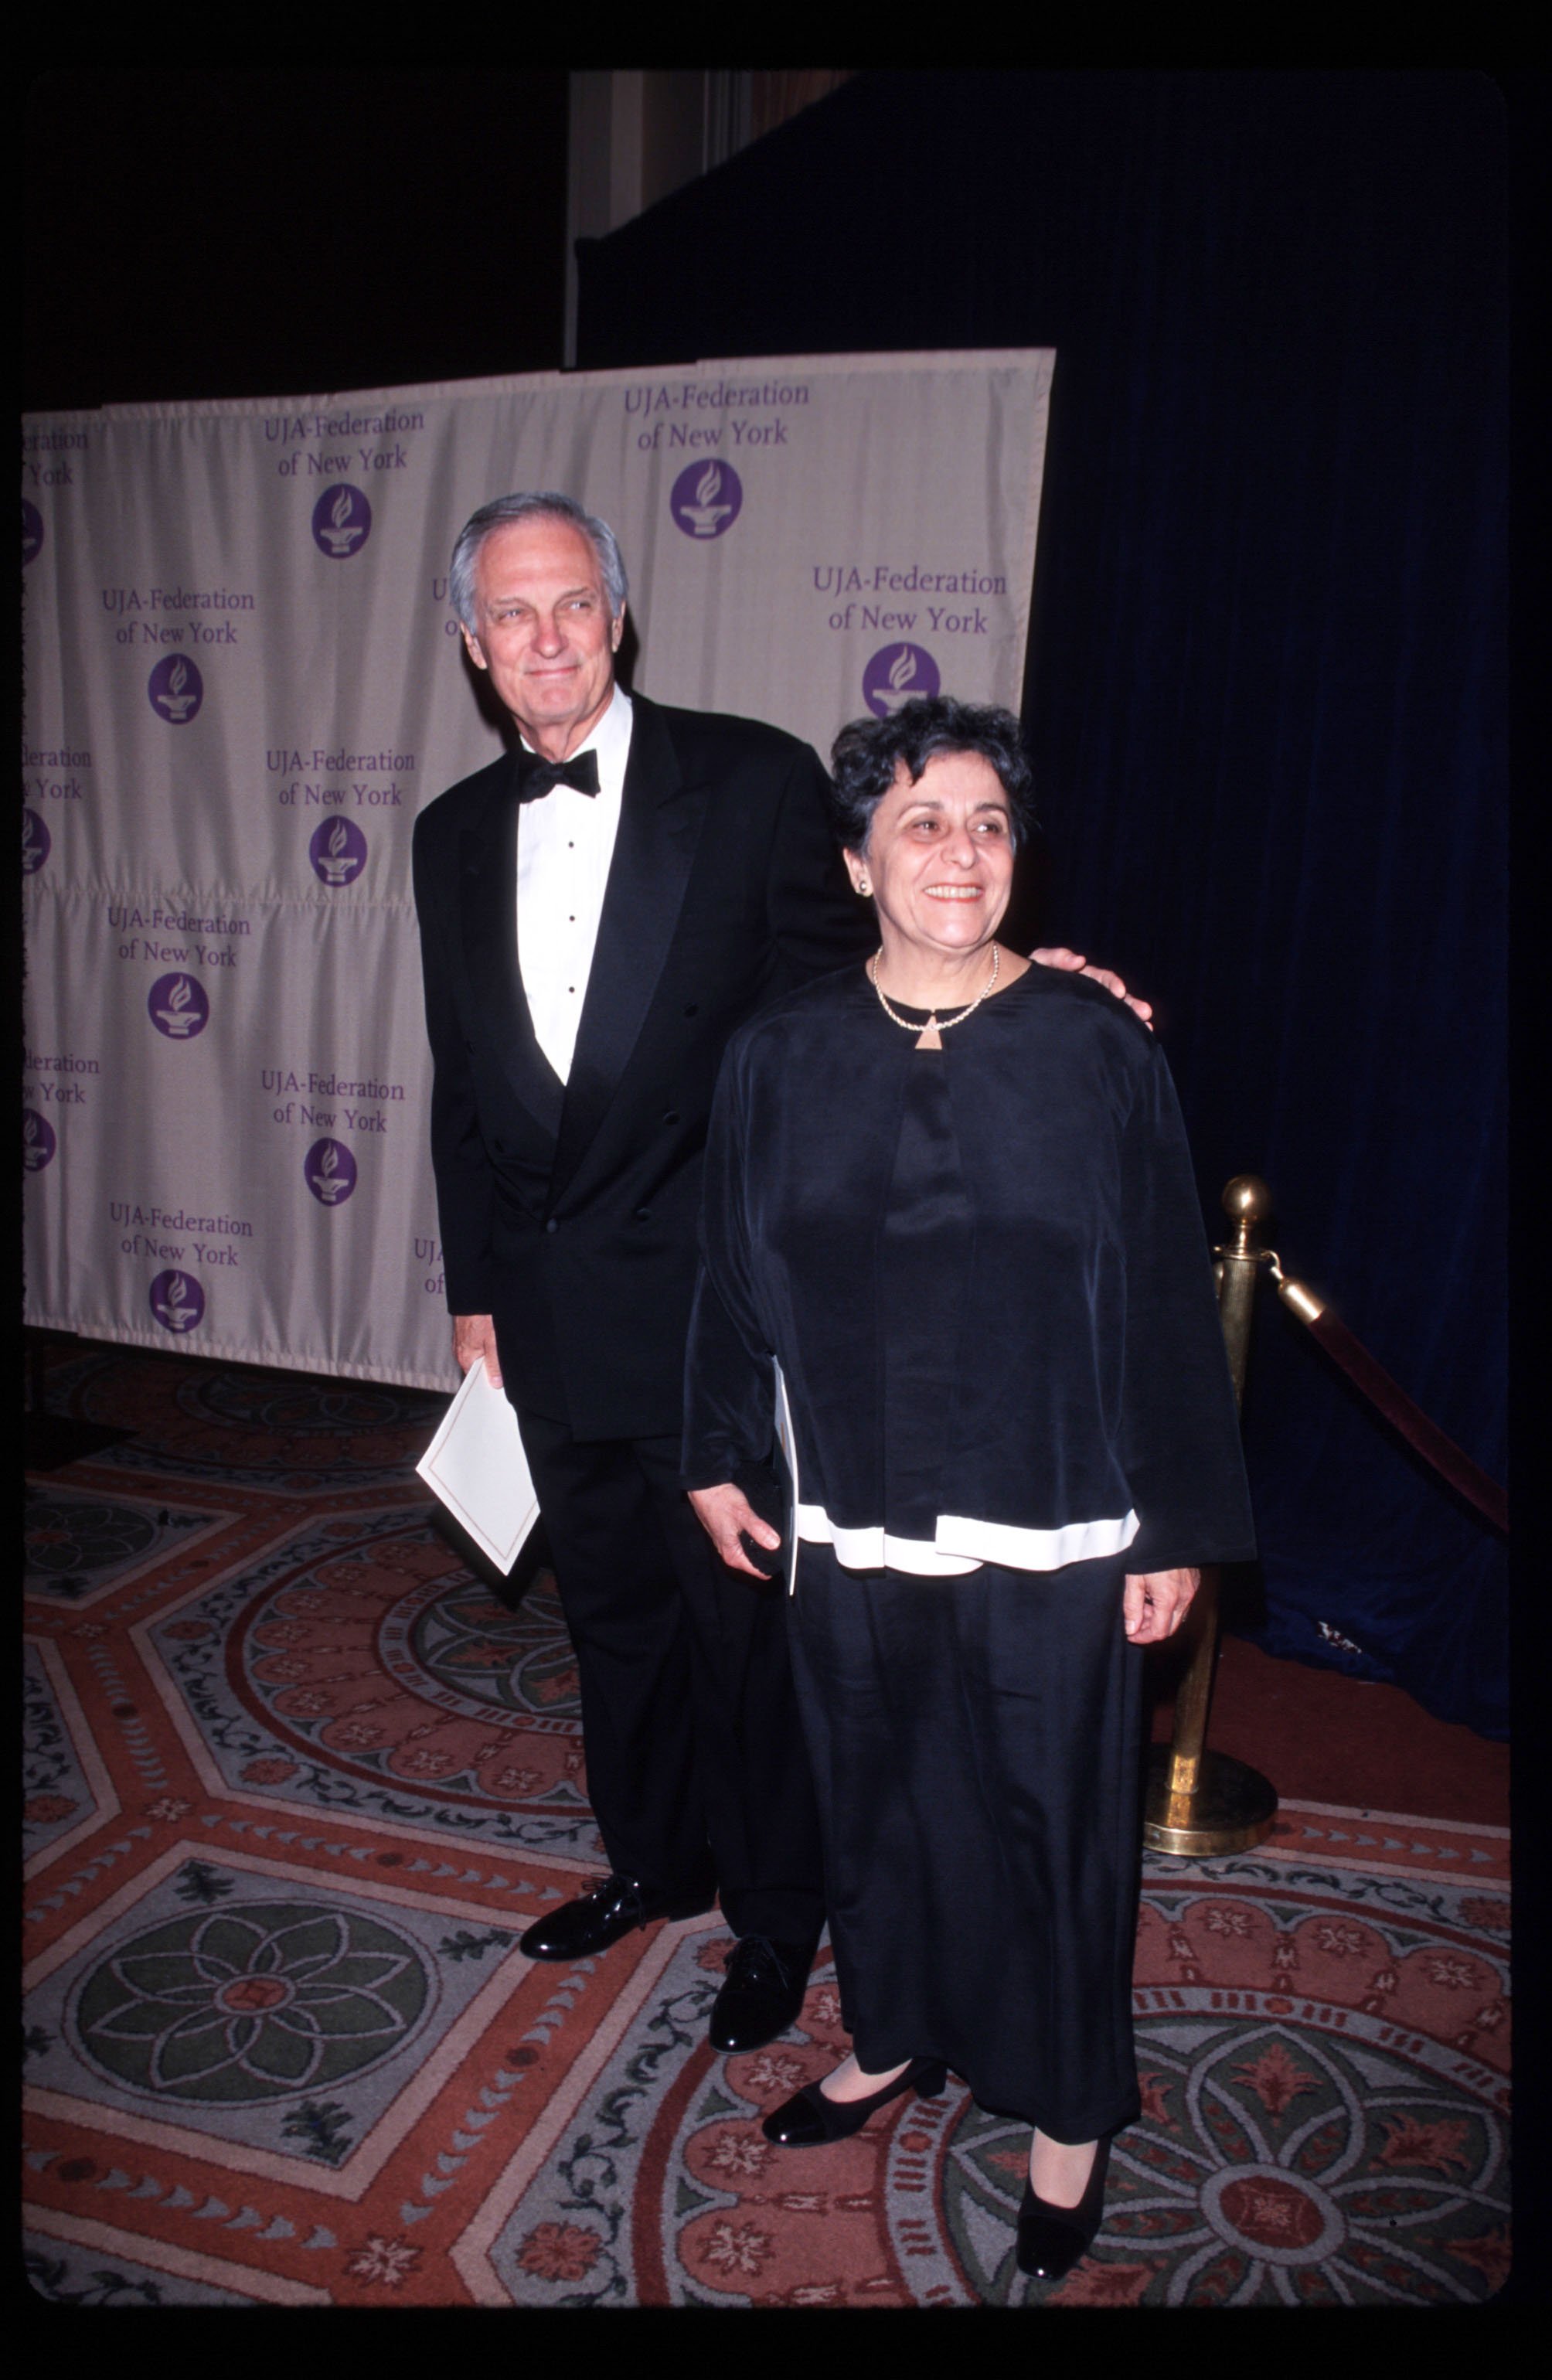  Alan Alda attends awards ceremony with his wife Arlene May 11, 1999 in New York City | Photo: GettyImages